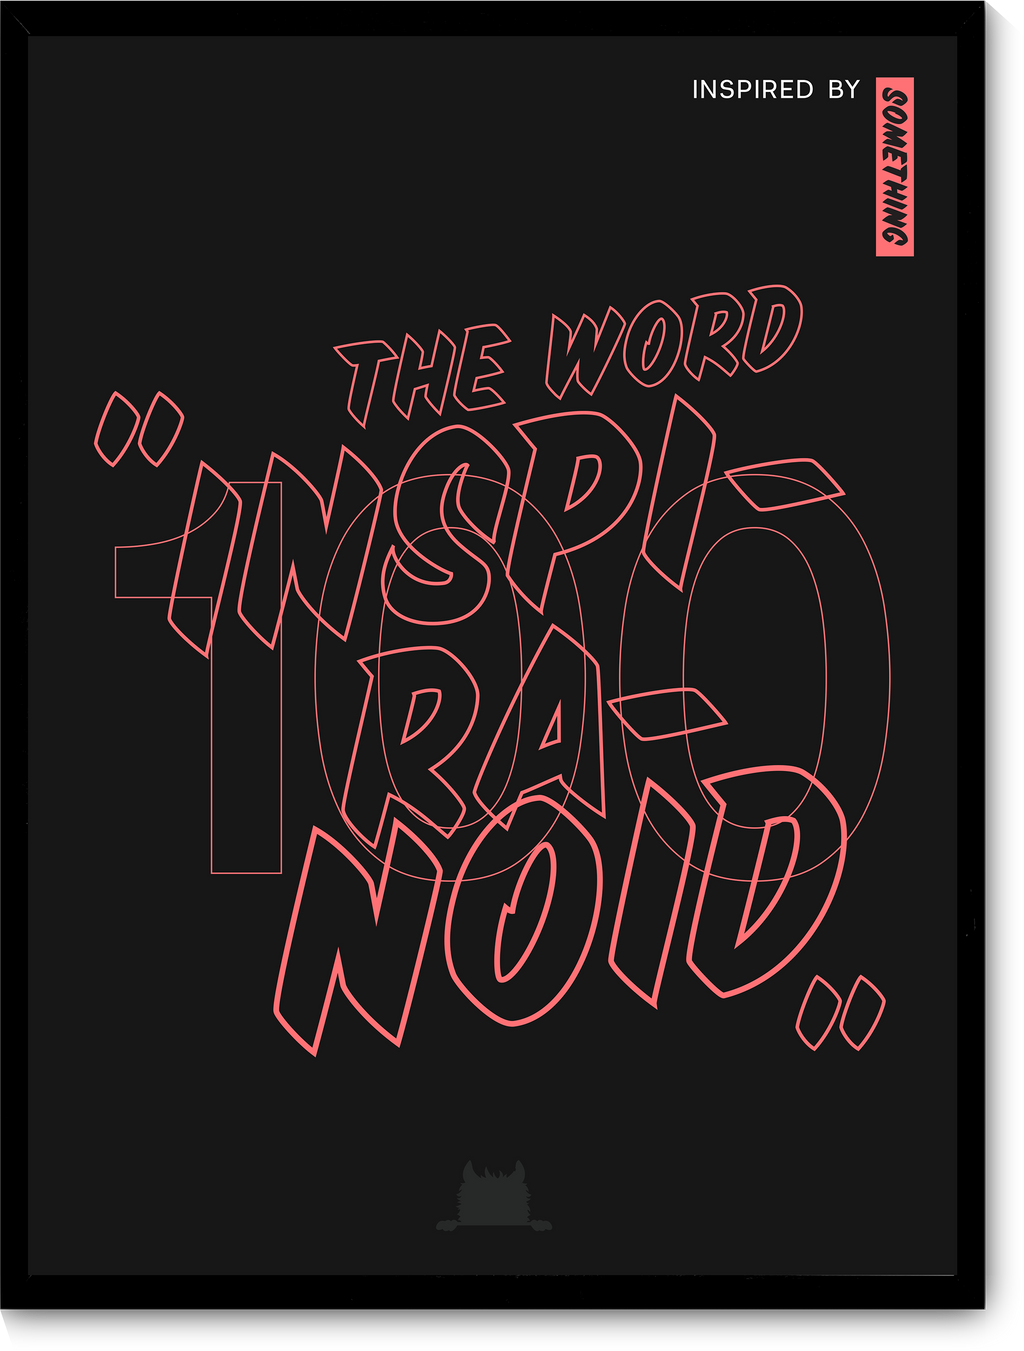 #100 Inspired by the word “inspiranoid.”